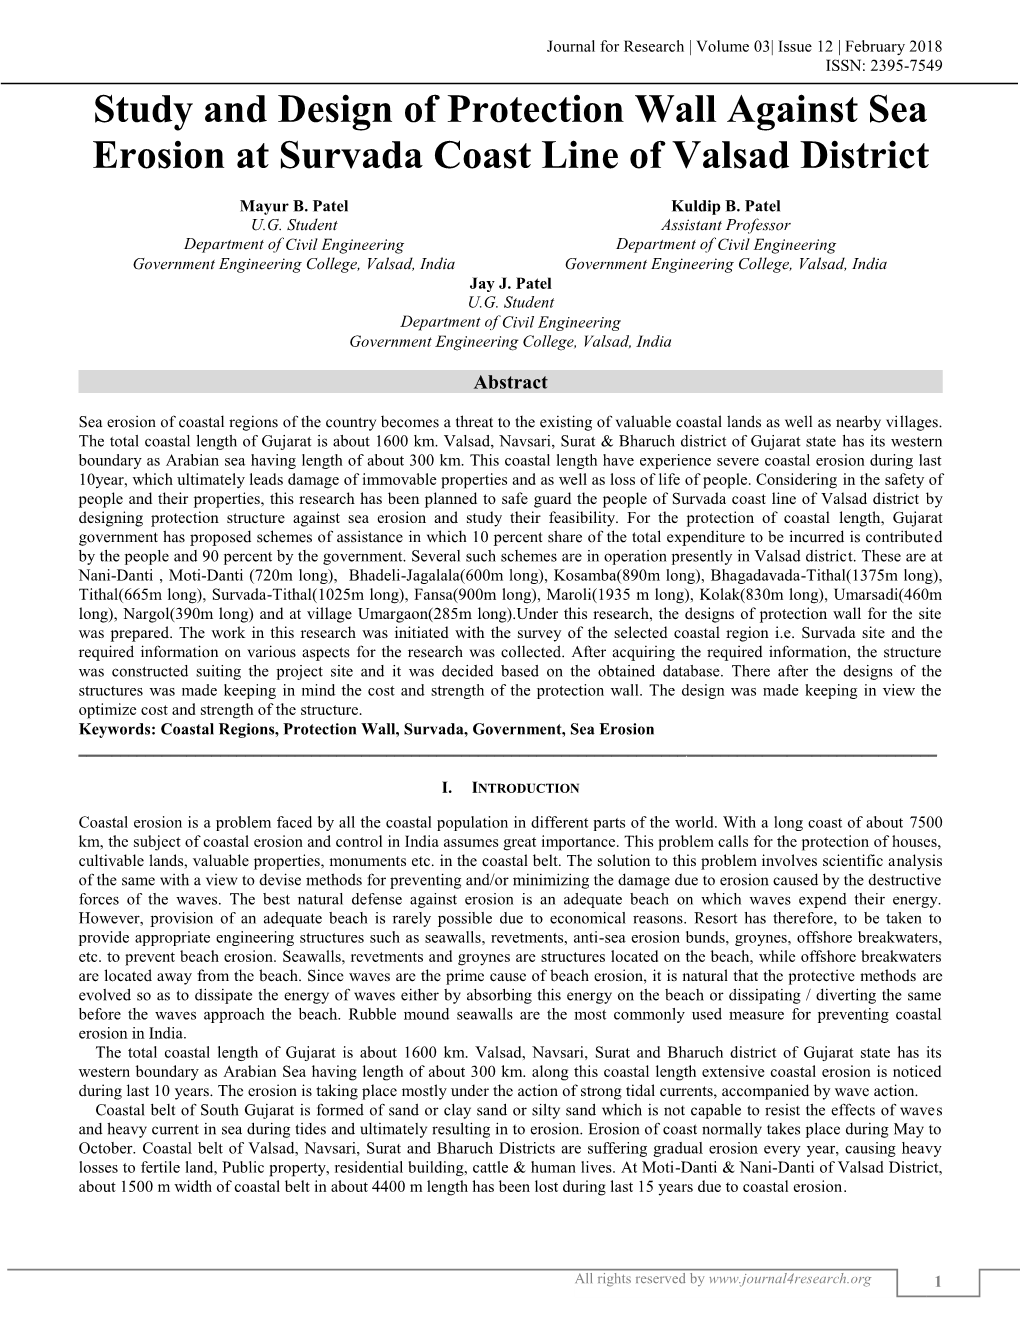 Study and Design of Protection Wall Against Sea Erosion at Survada Coast Line of Valsad District (J4R/ Volume 03 / Issue 12 / 001)